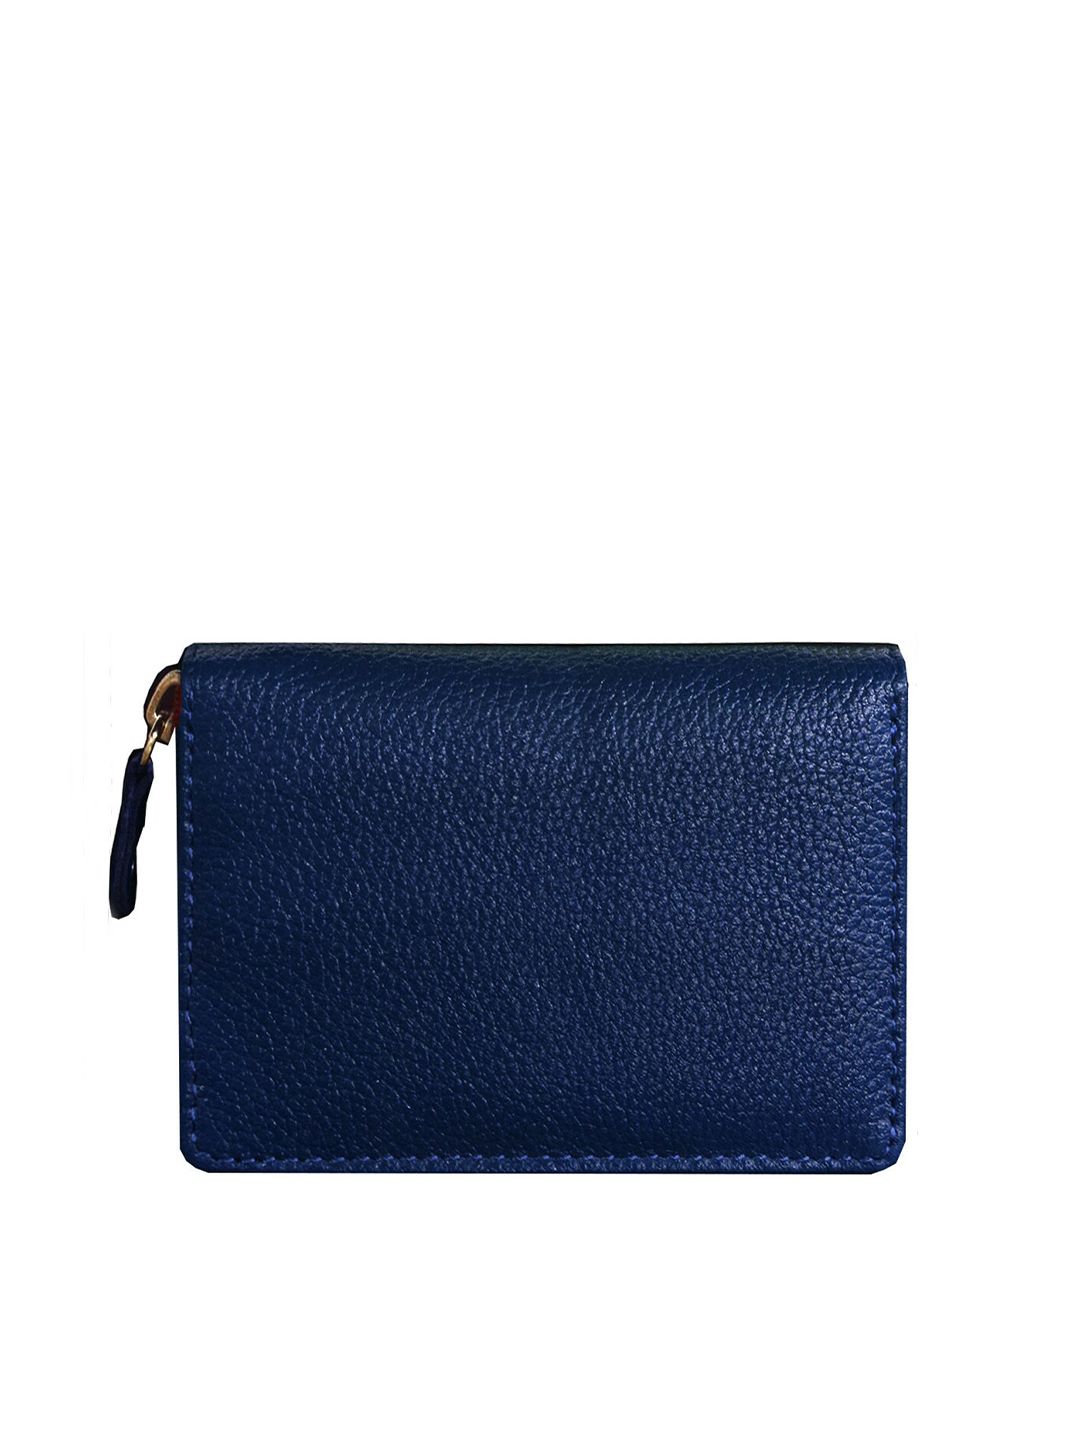 ABYS Unisex Blue Solid Leather Blue Credit Card Holder Price in India